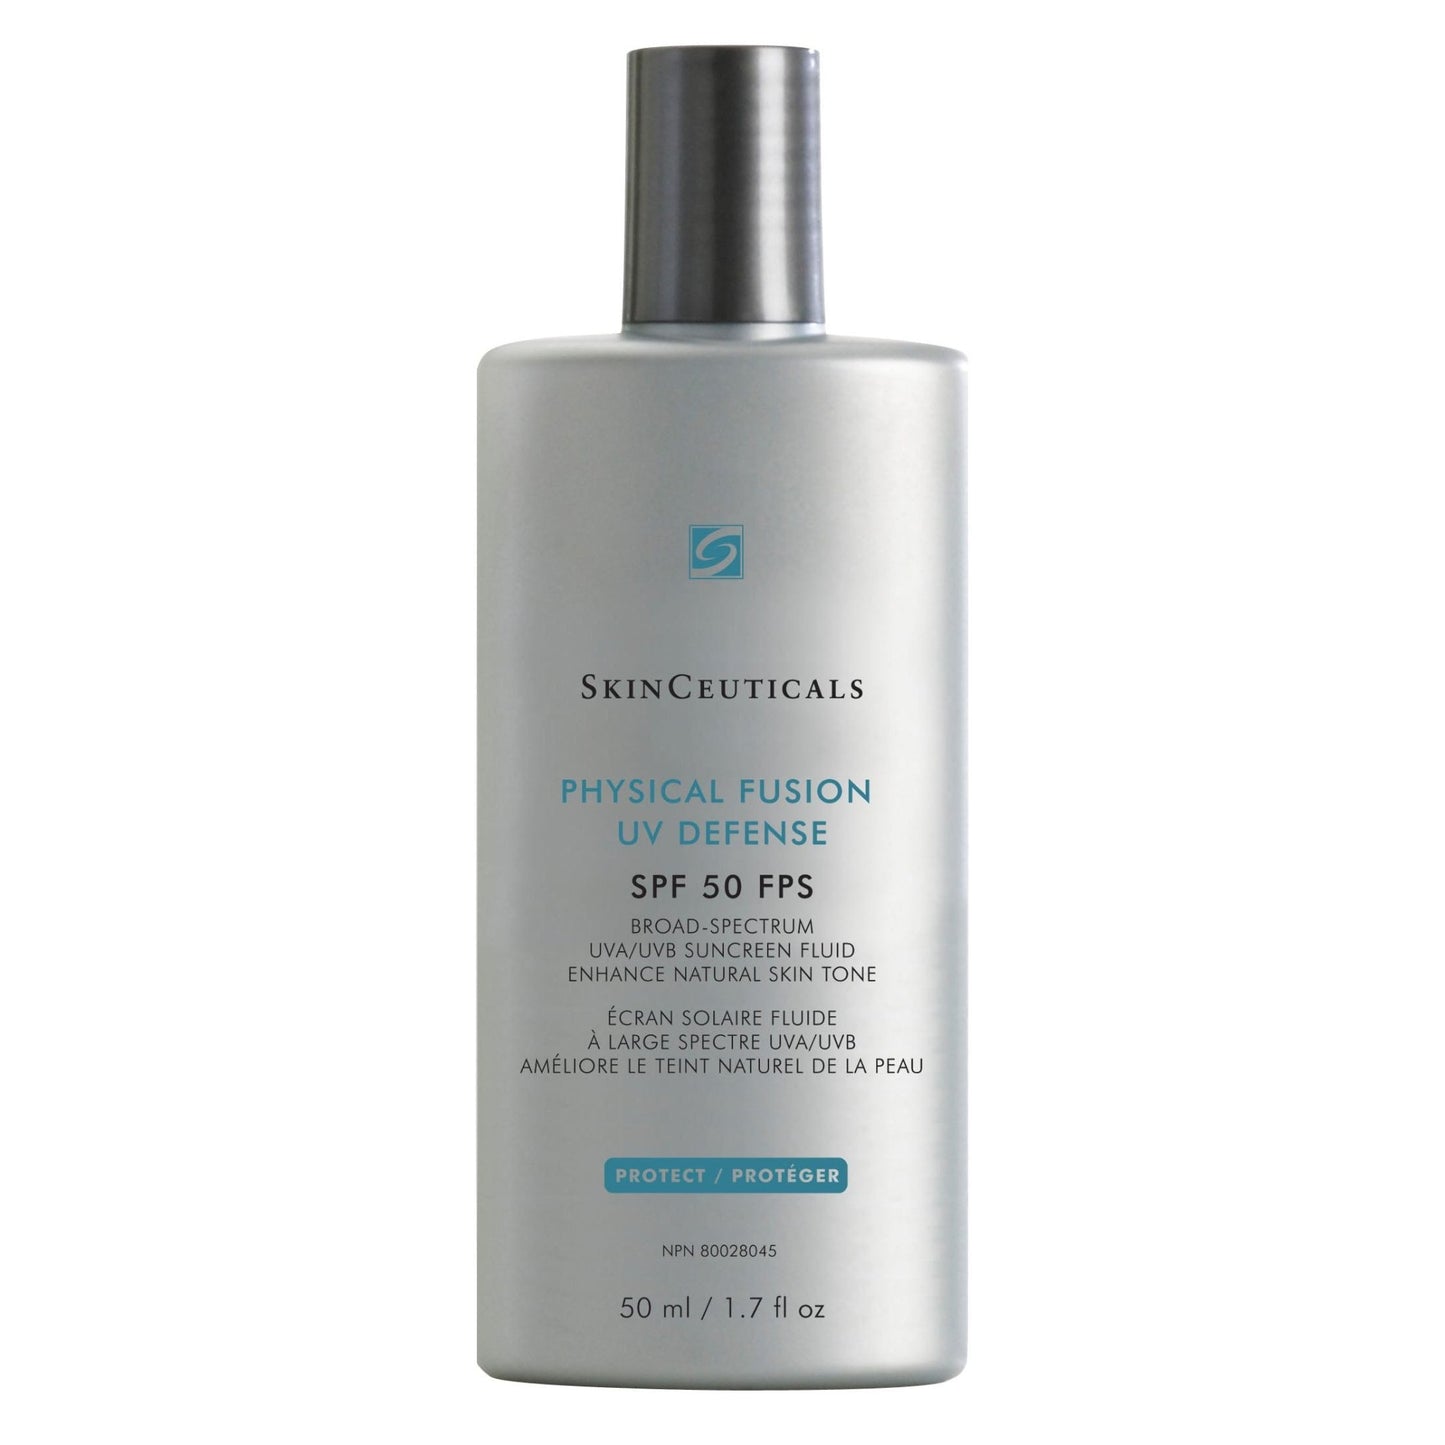 SkinCeuticals - Physical Fusion UV Defense SPF 50 - Espace Skins Montreal